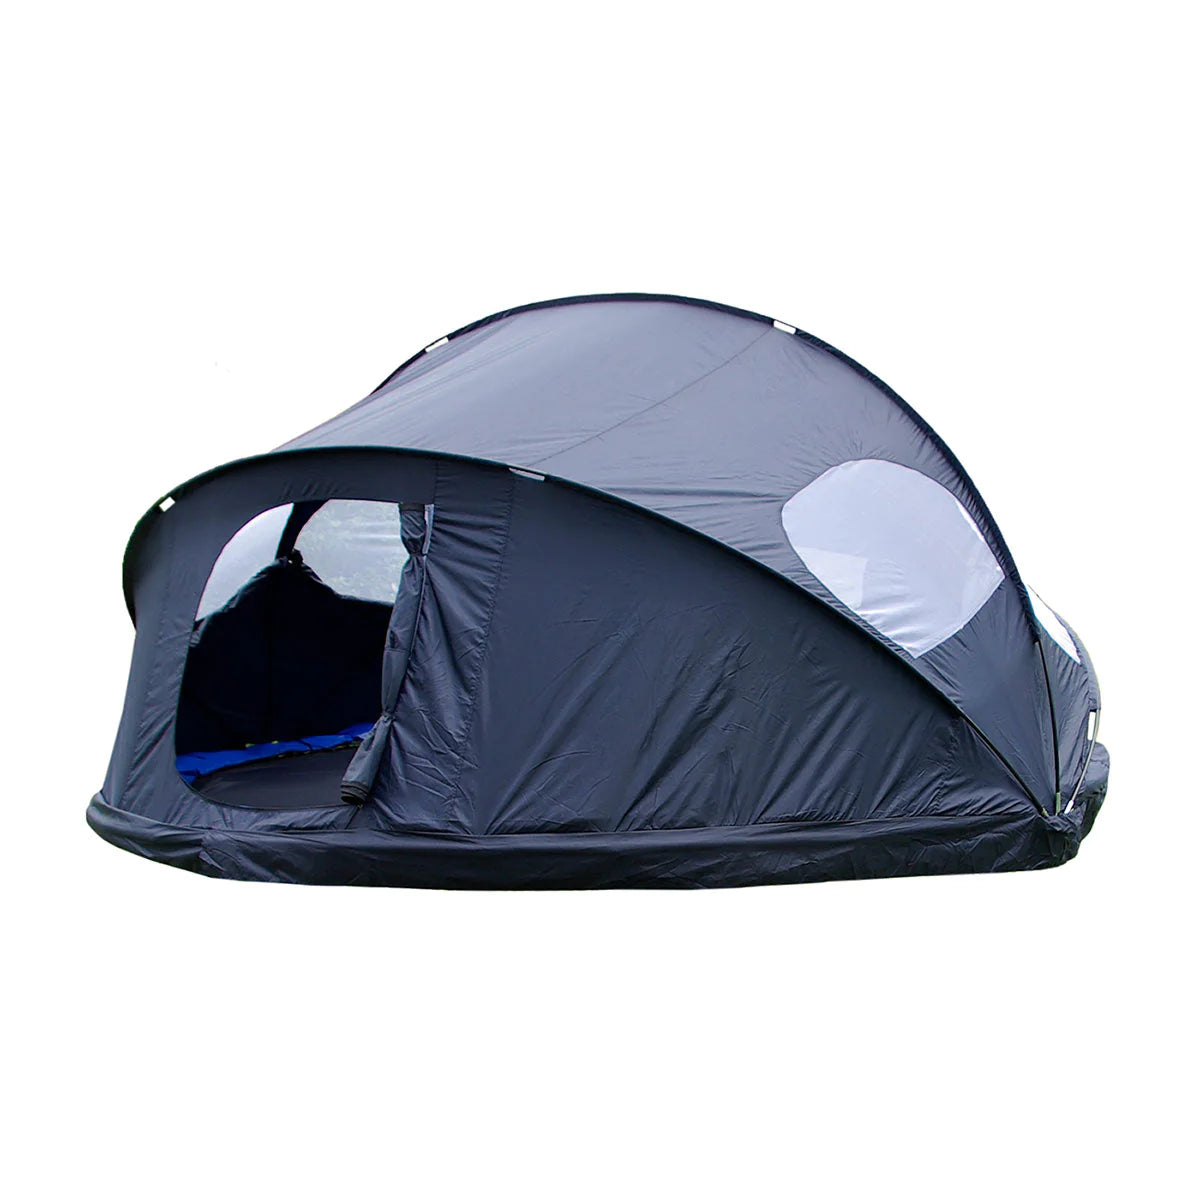 Trampoline tent for a round trampoline 